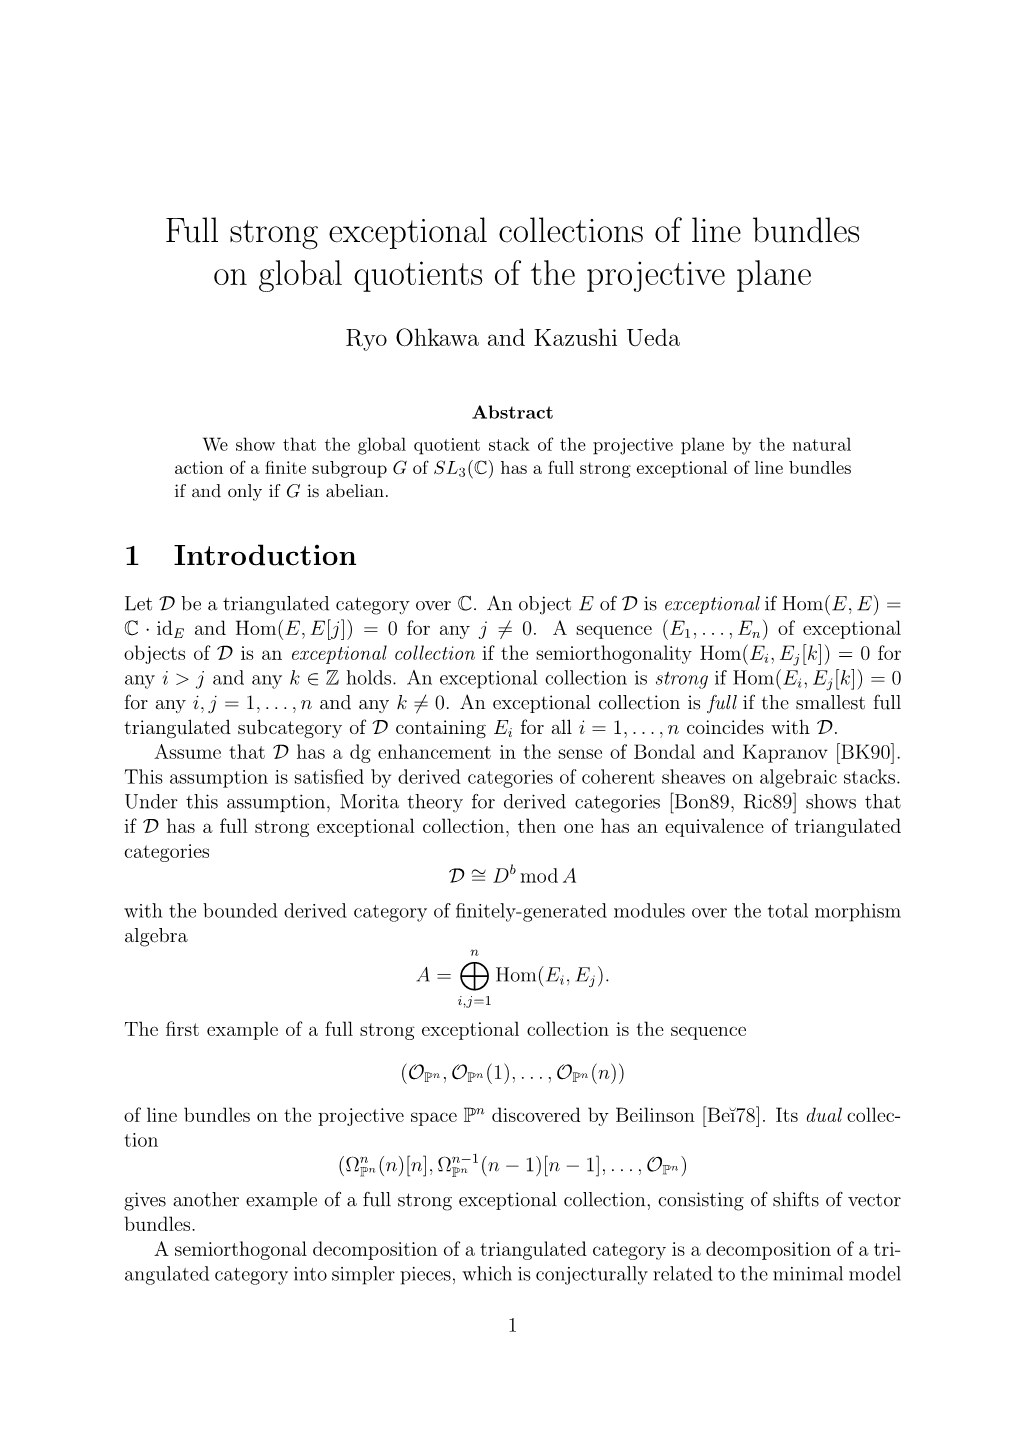 Full Strong Exceptional Collections of Line Bundles on Global Quotients of the Projective Plane